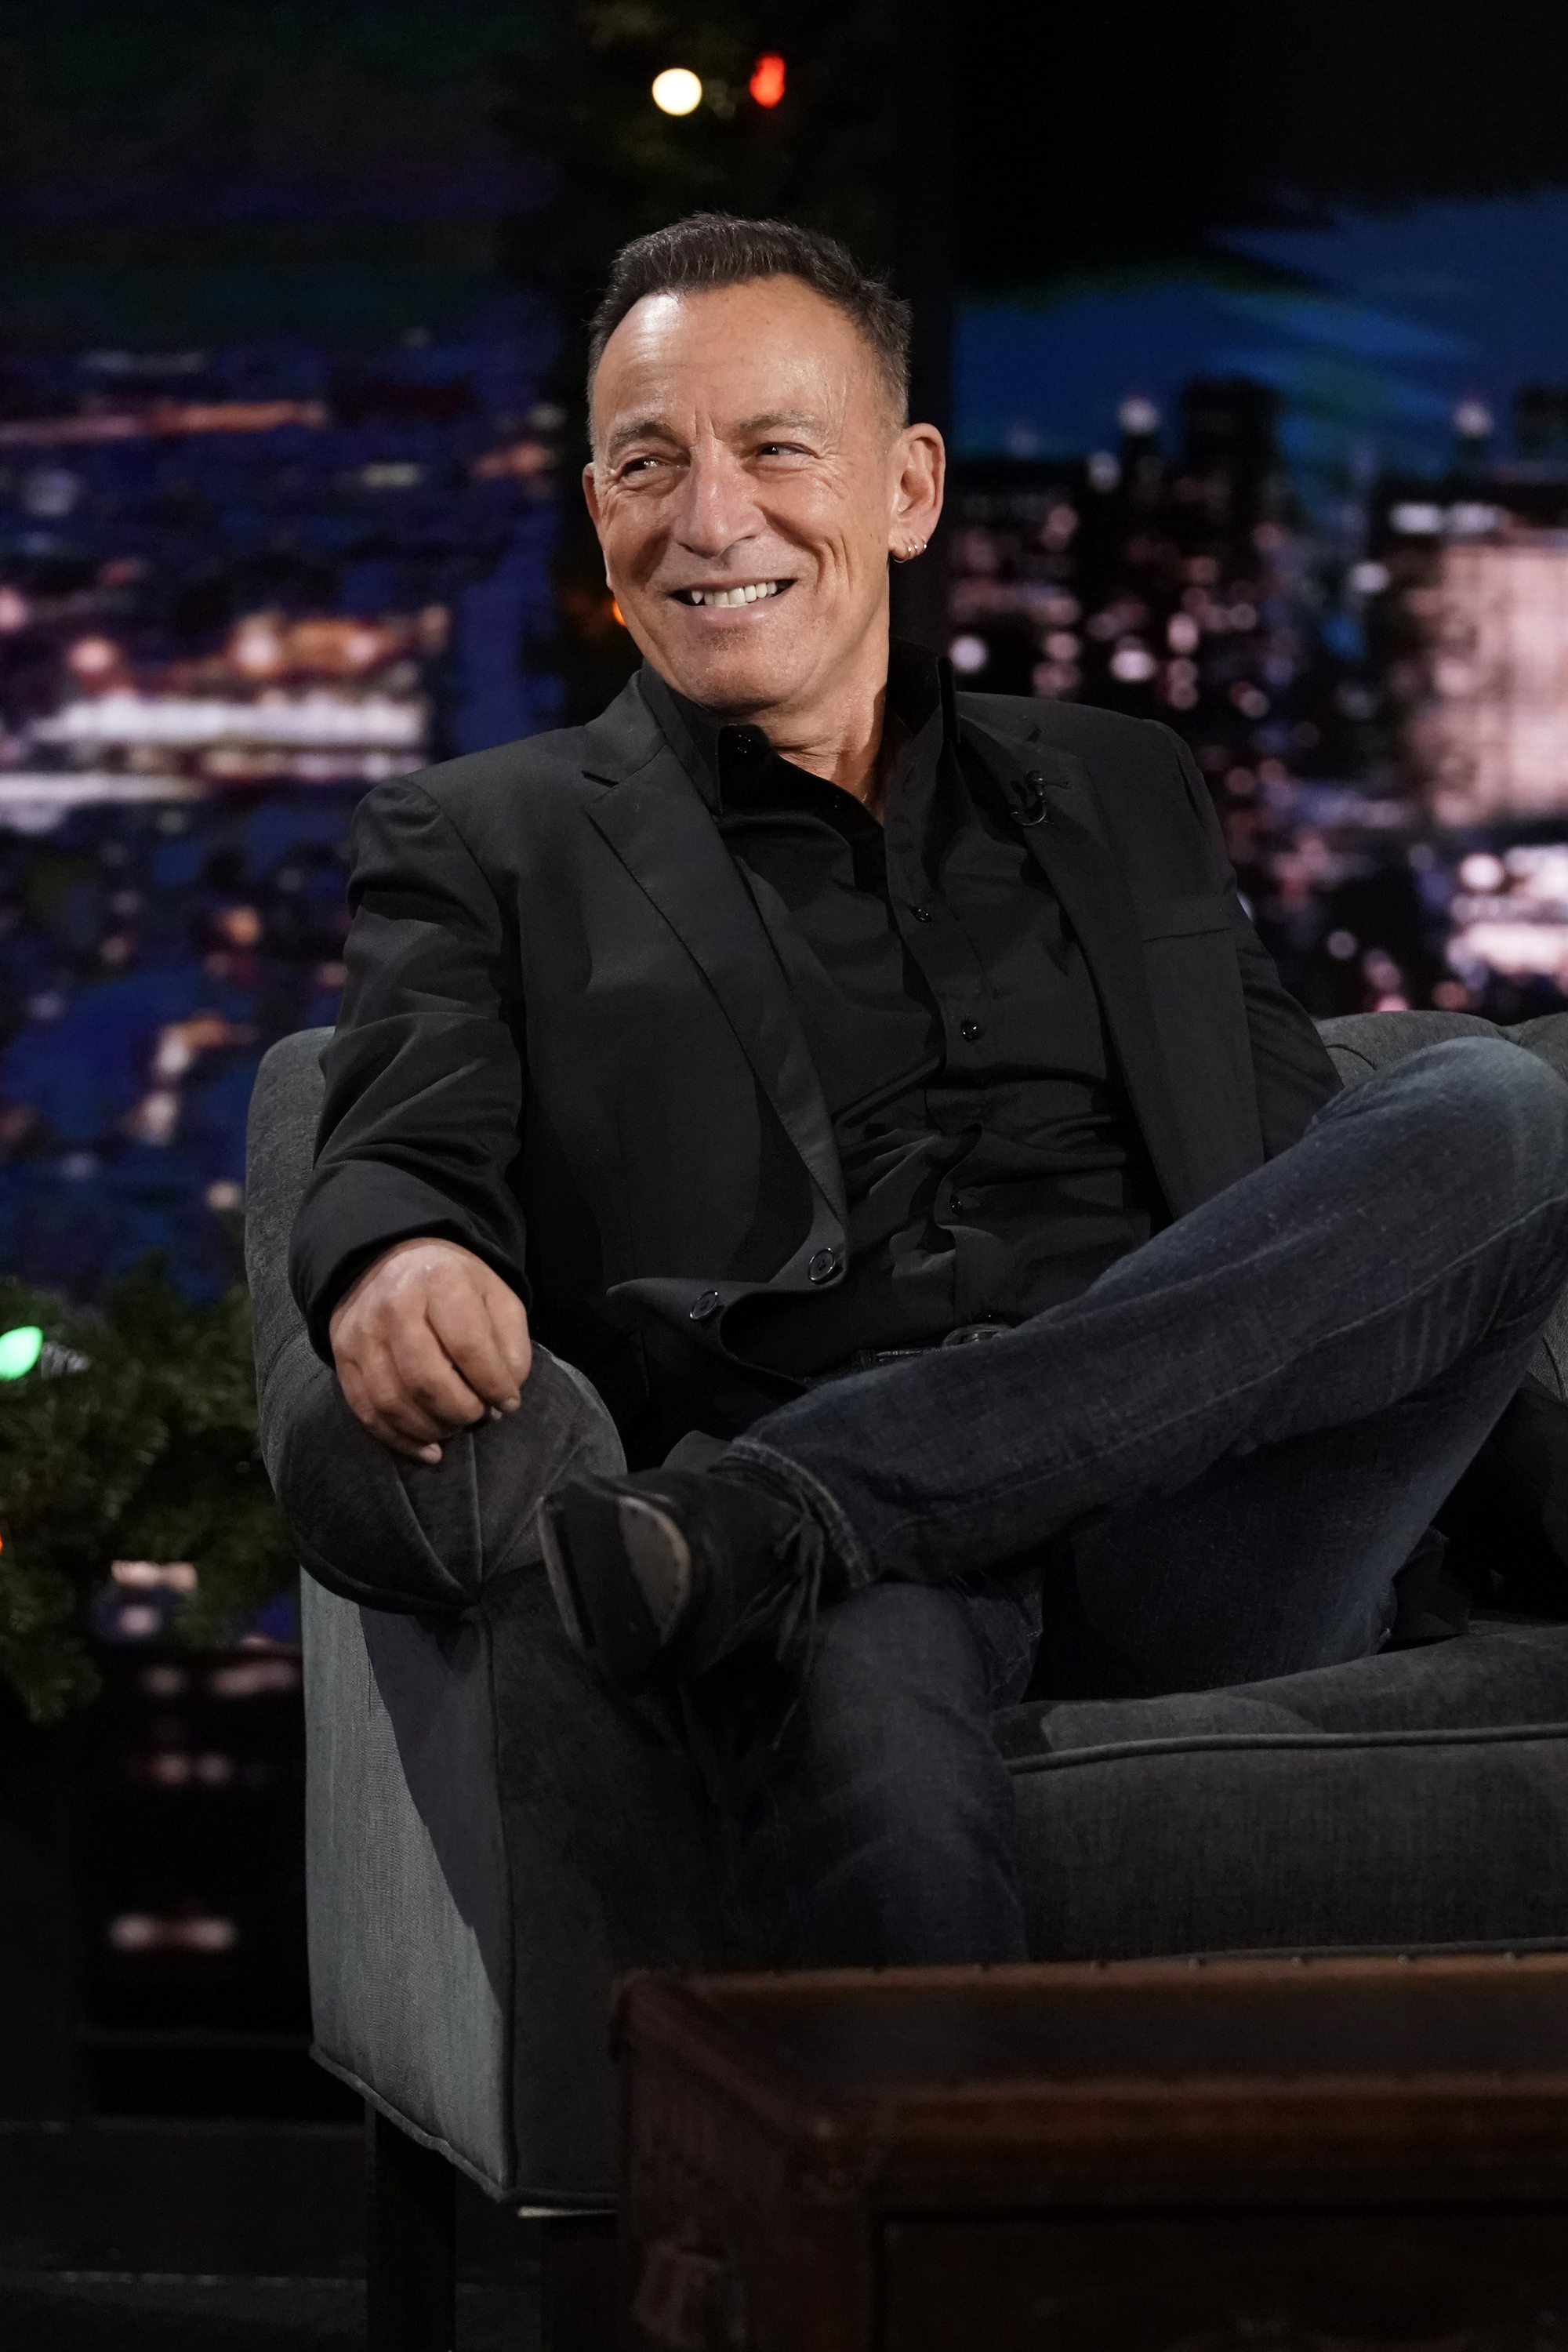 Celebrity male sitting cross-legged in a talk show setting wearing a black shirt and jacket